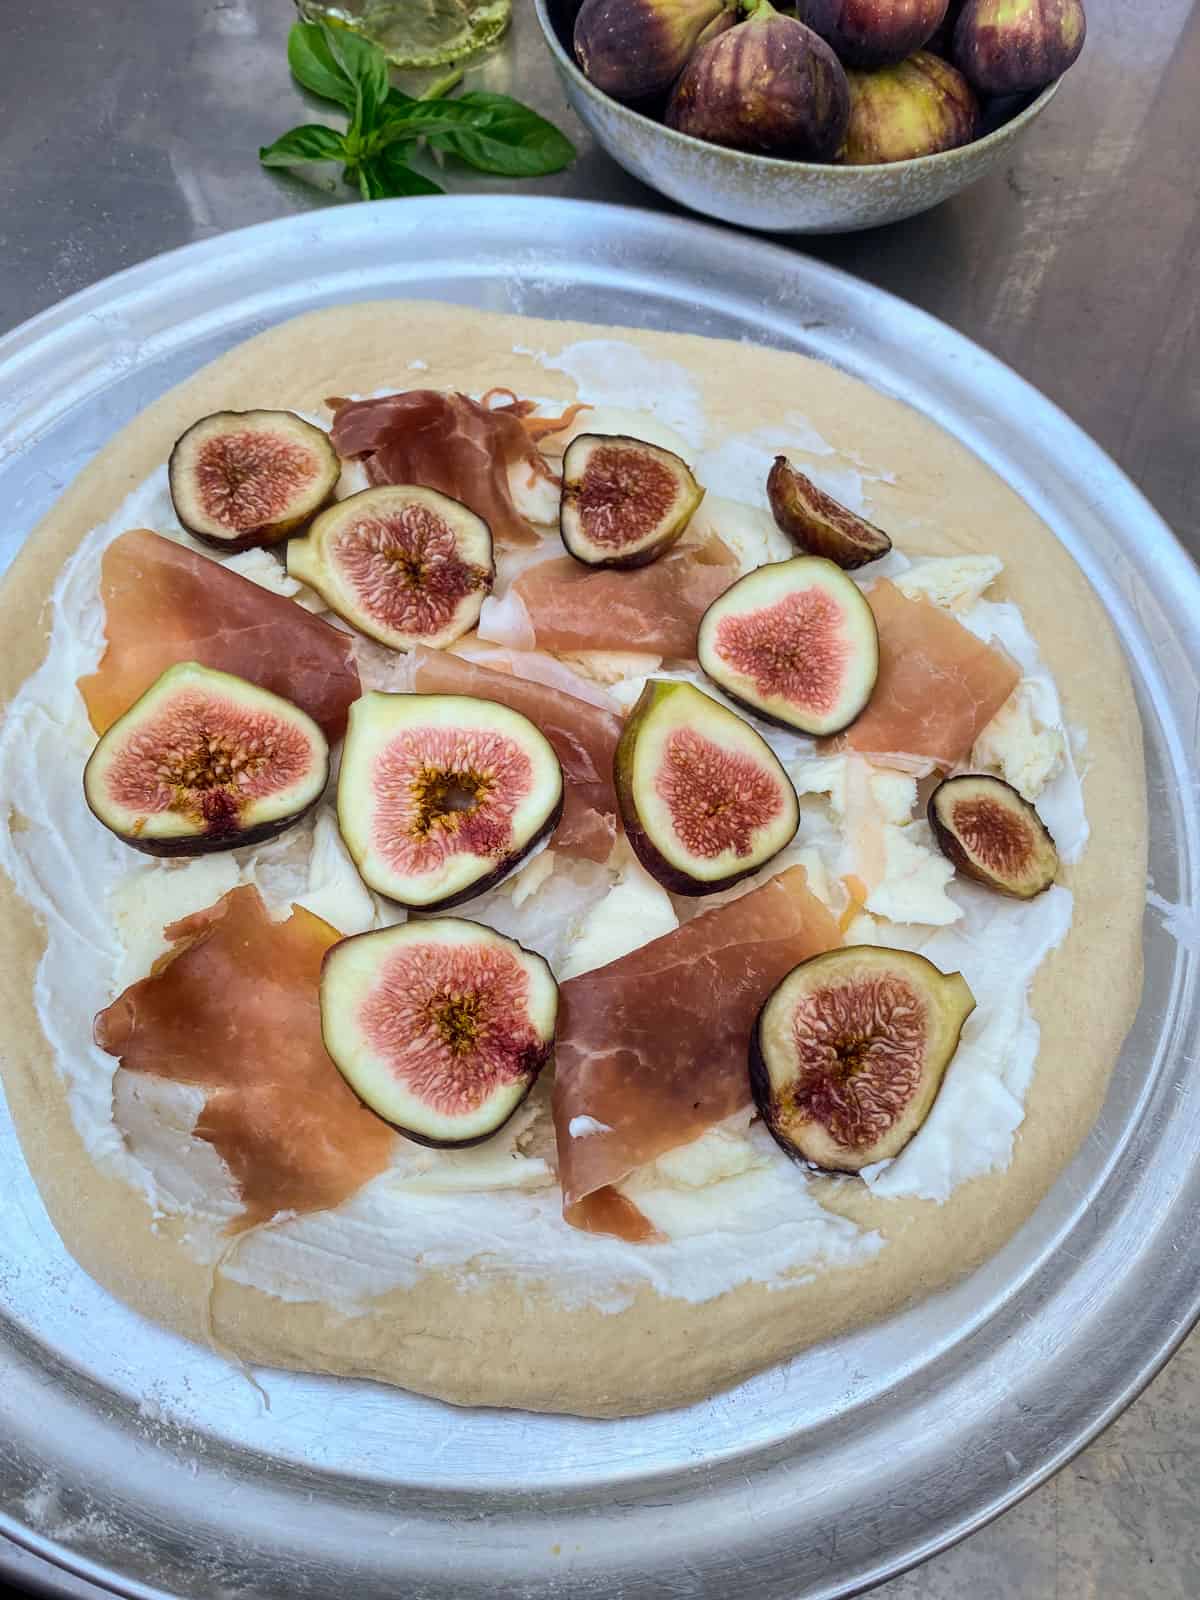 Once the cheese is on, layer slices of prosciutto and sliced fresh figs onto the pizza.